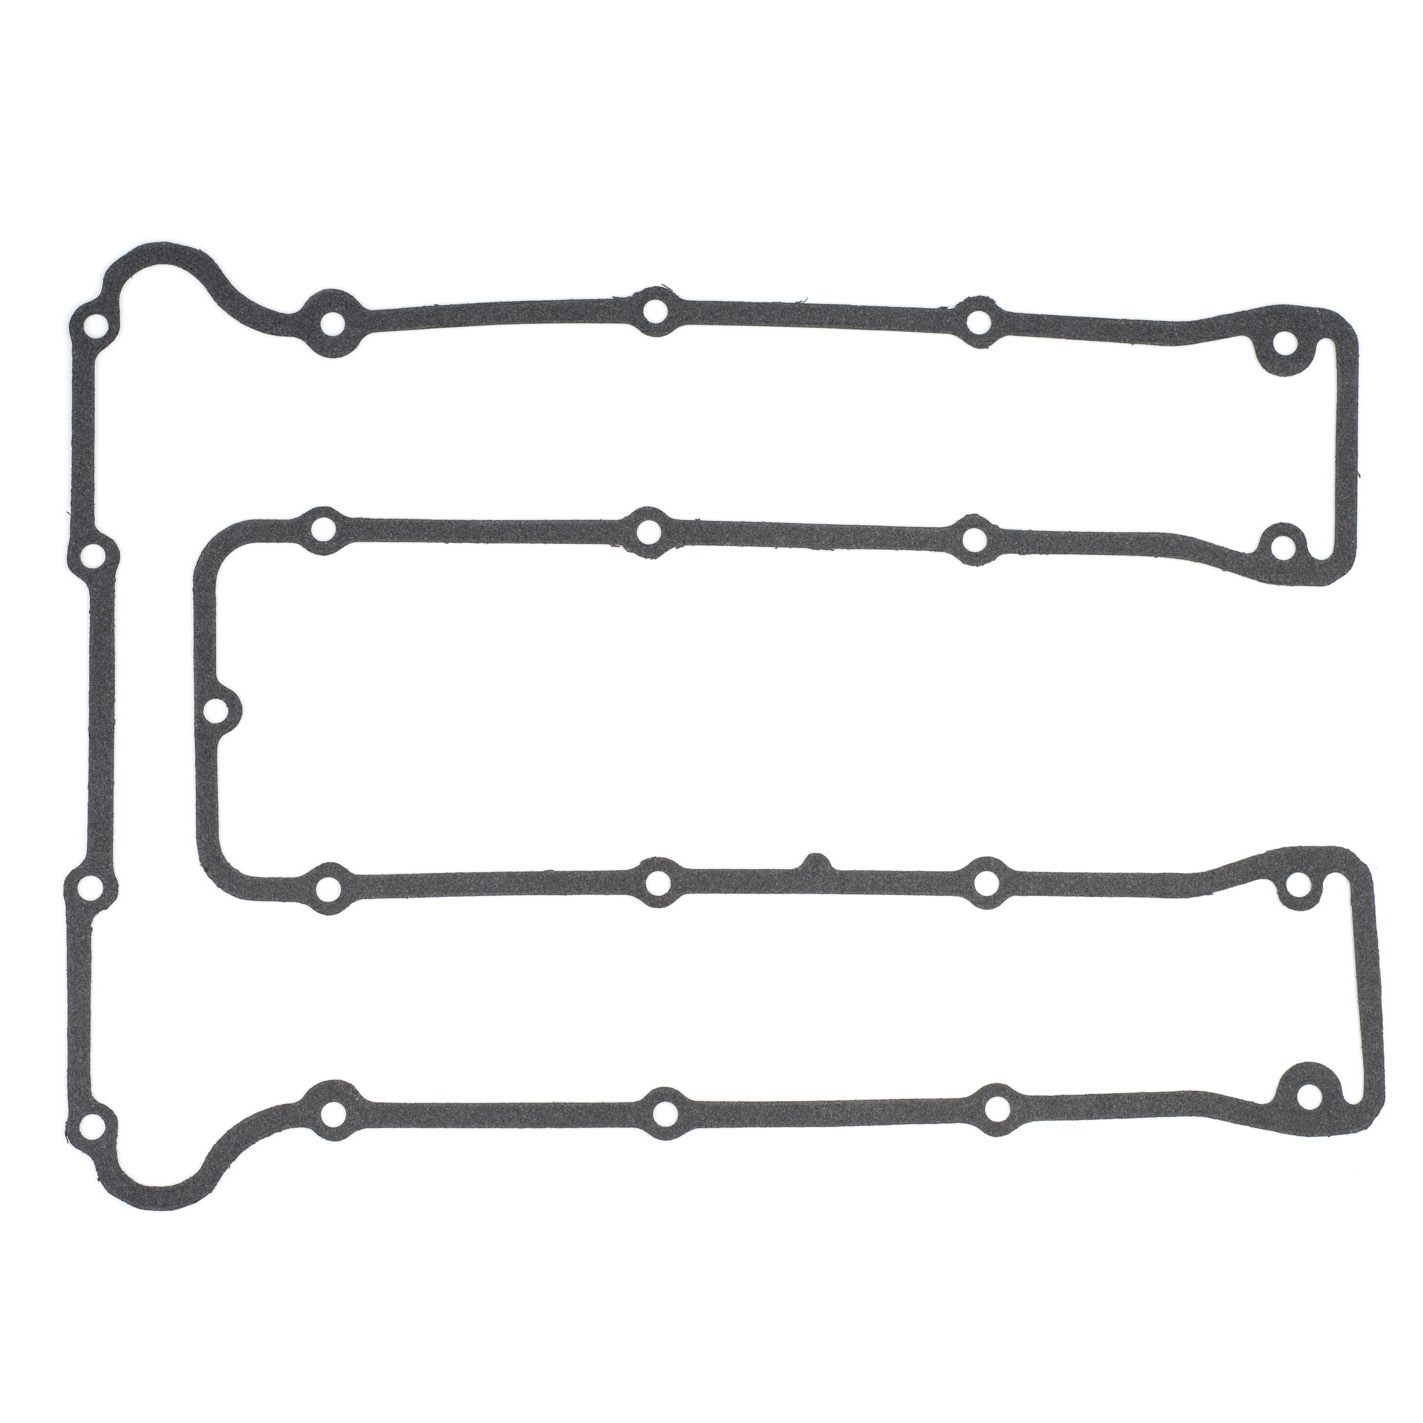 XS850 Valve Cover Gasket